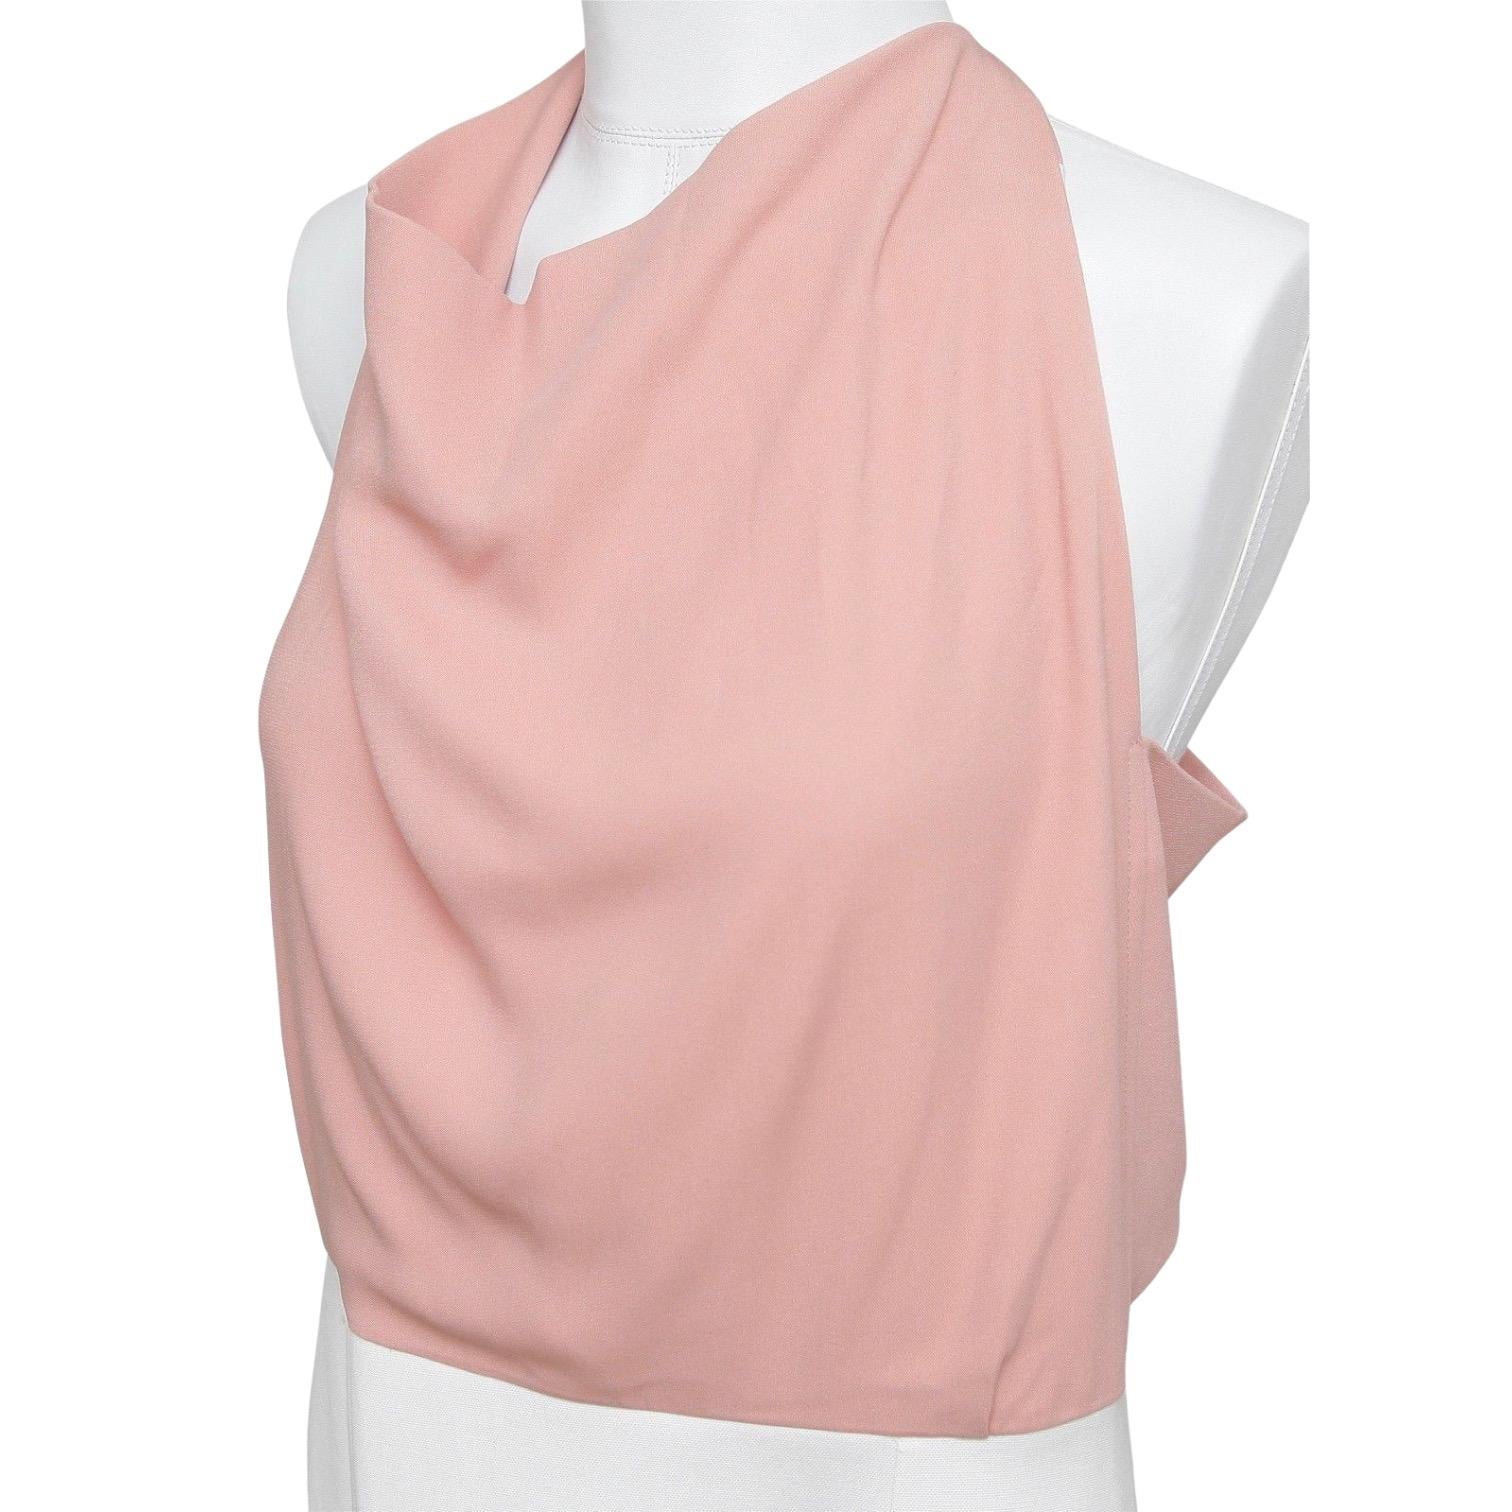 ROLAND MOURET Sleeveless Dress Cowl Neck 2016 PAGET White Pink 14 BNWT $1230 For Sale 1